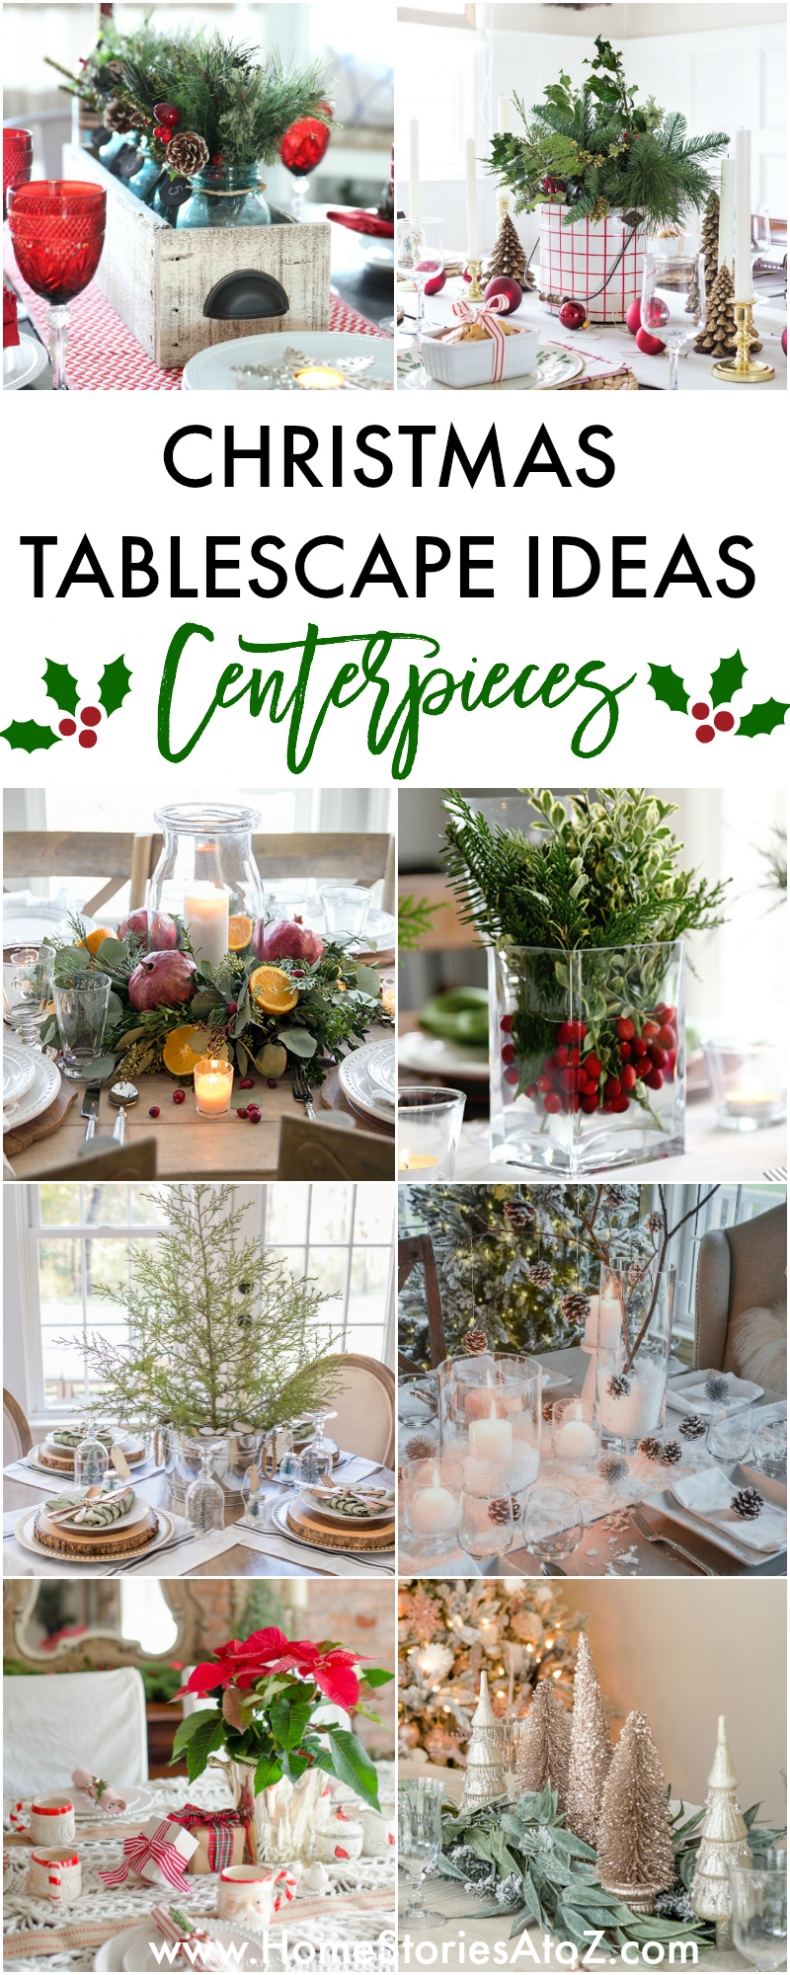 Christmas Tablescape Centerpiece Ideas - Home Stories A to Z